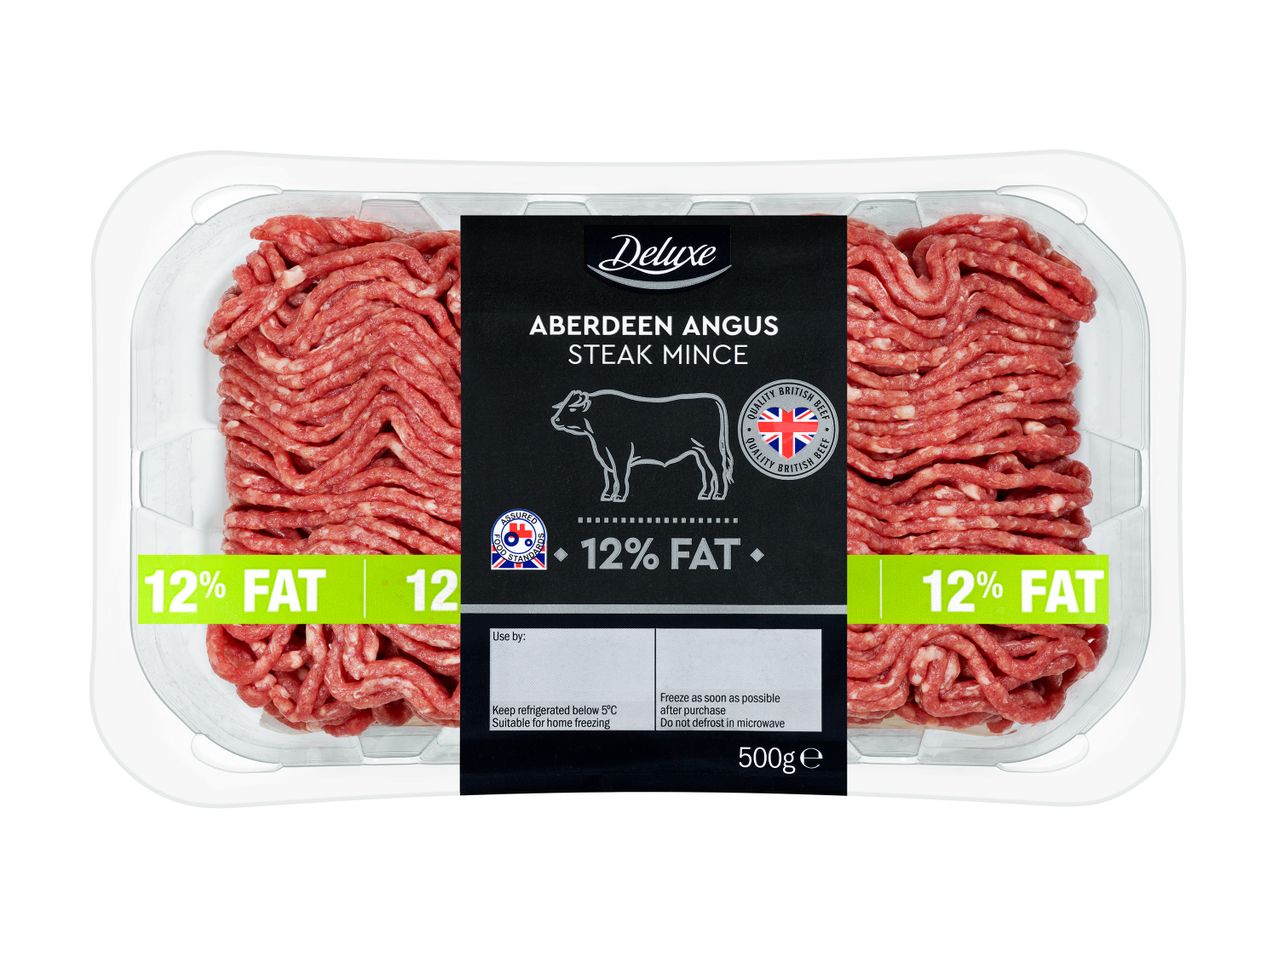 Go to full screen view: Deluxe Aberdeen Angus Beef Mince - Image 1